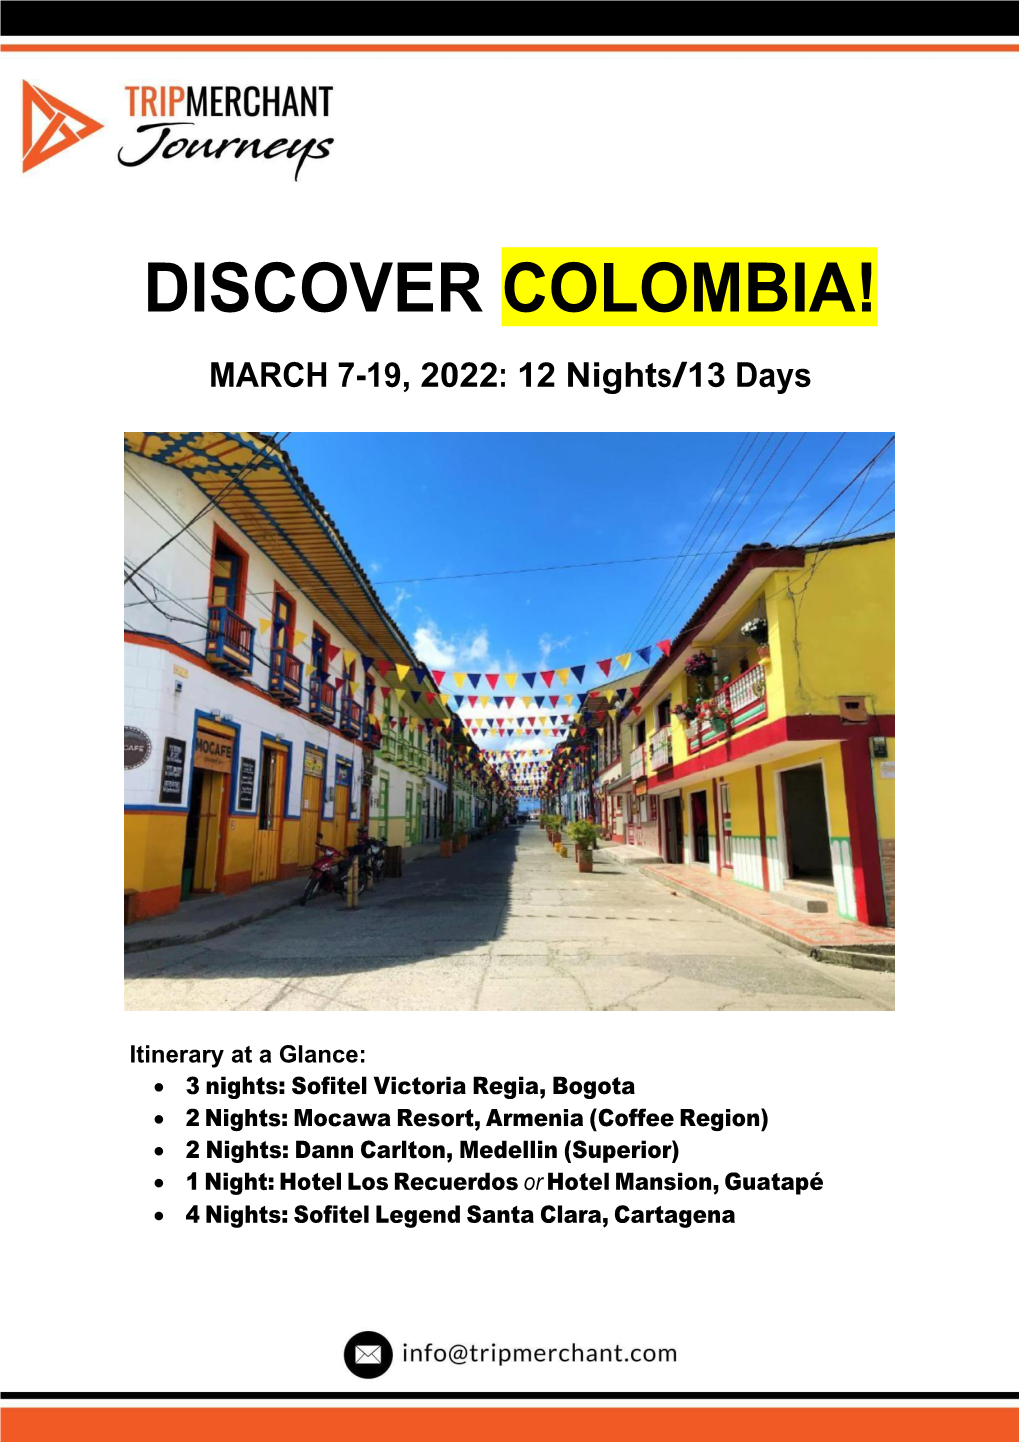 DISCOVER COLOMBIA! MARCH 7-19, 2022: 12 Nights/13 Days